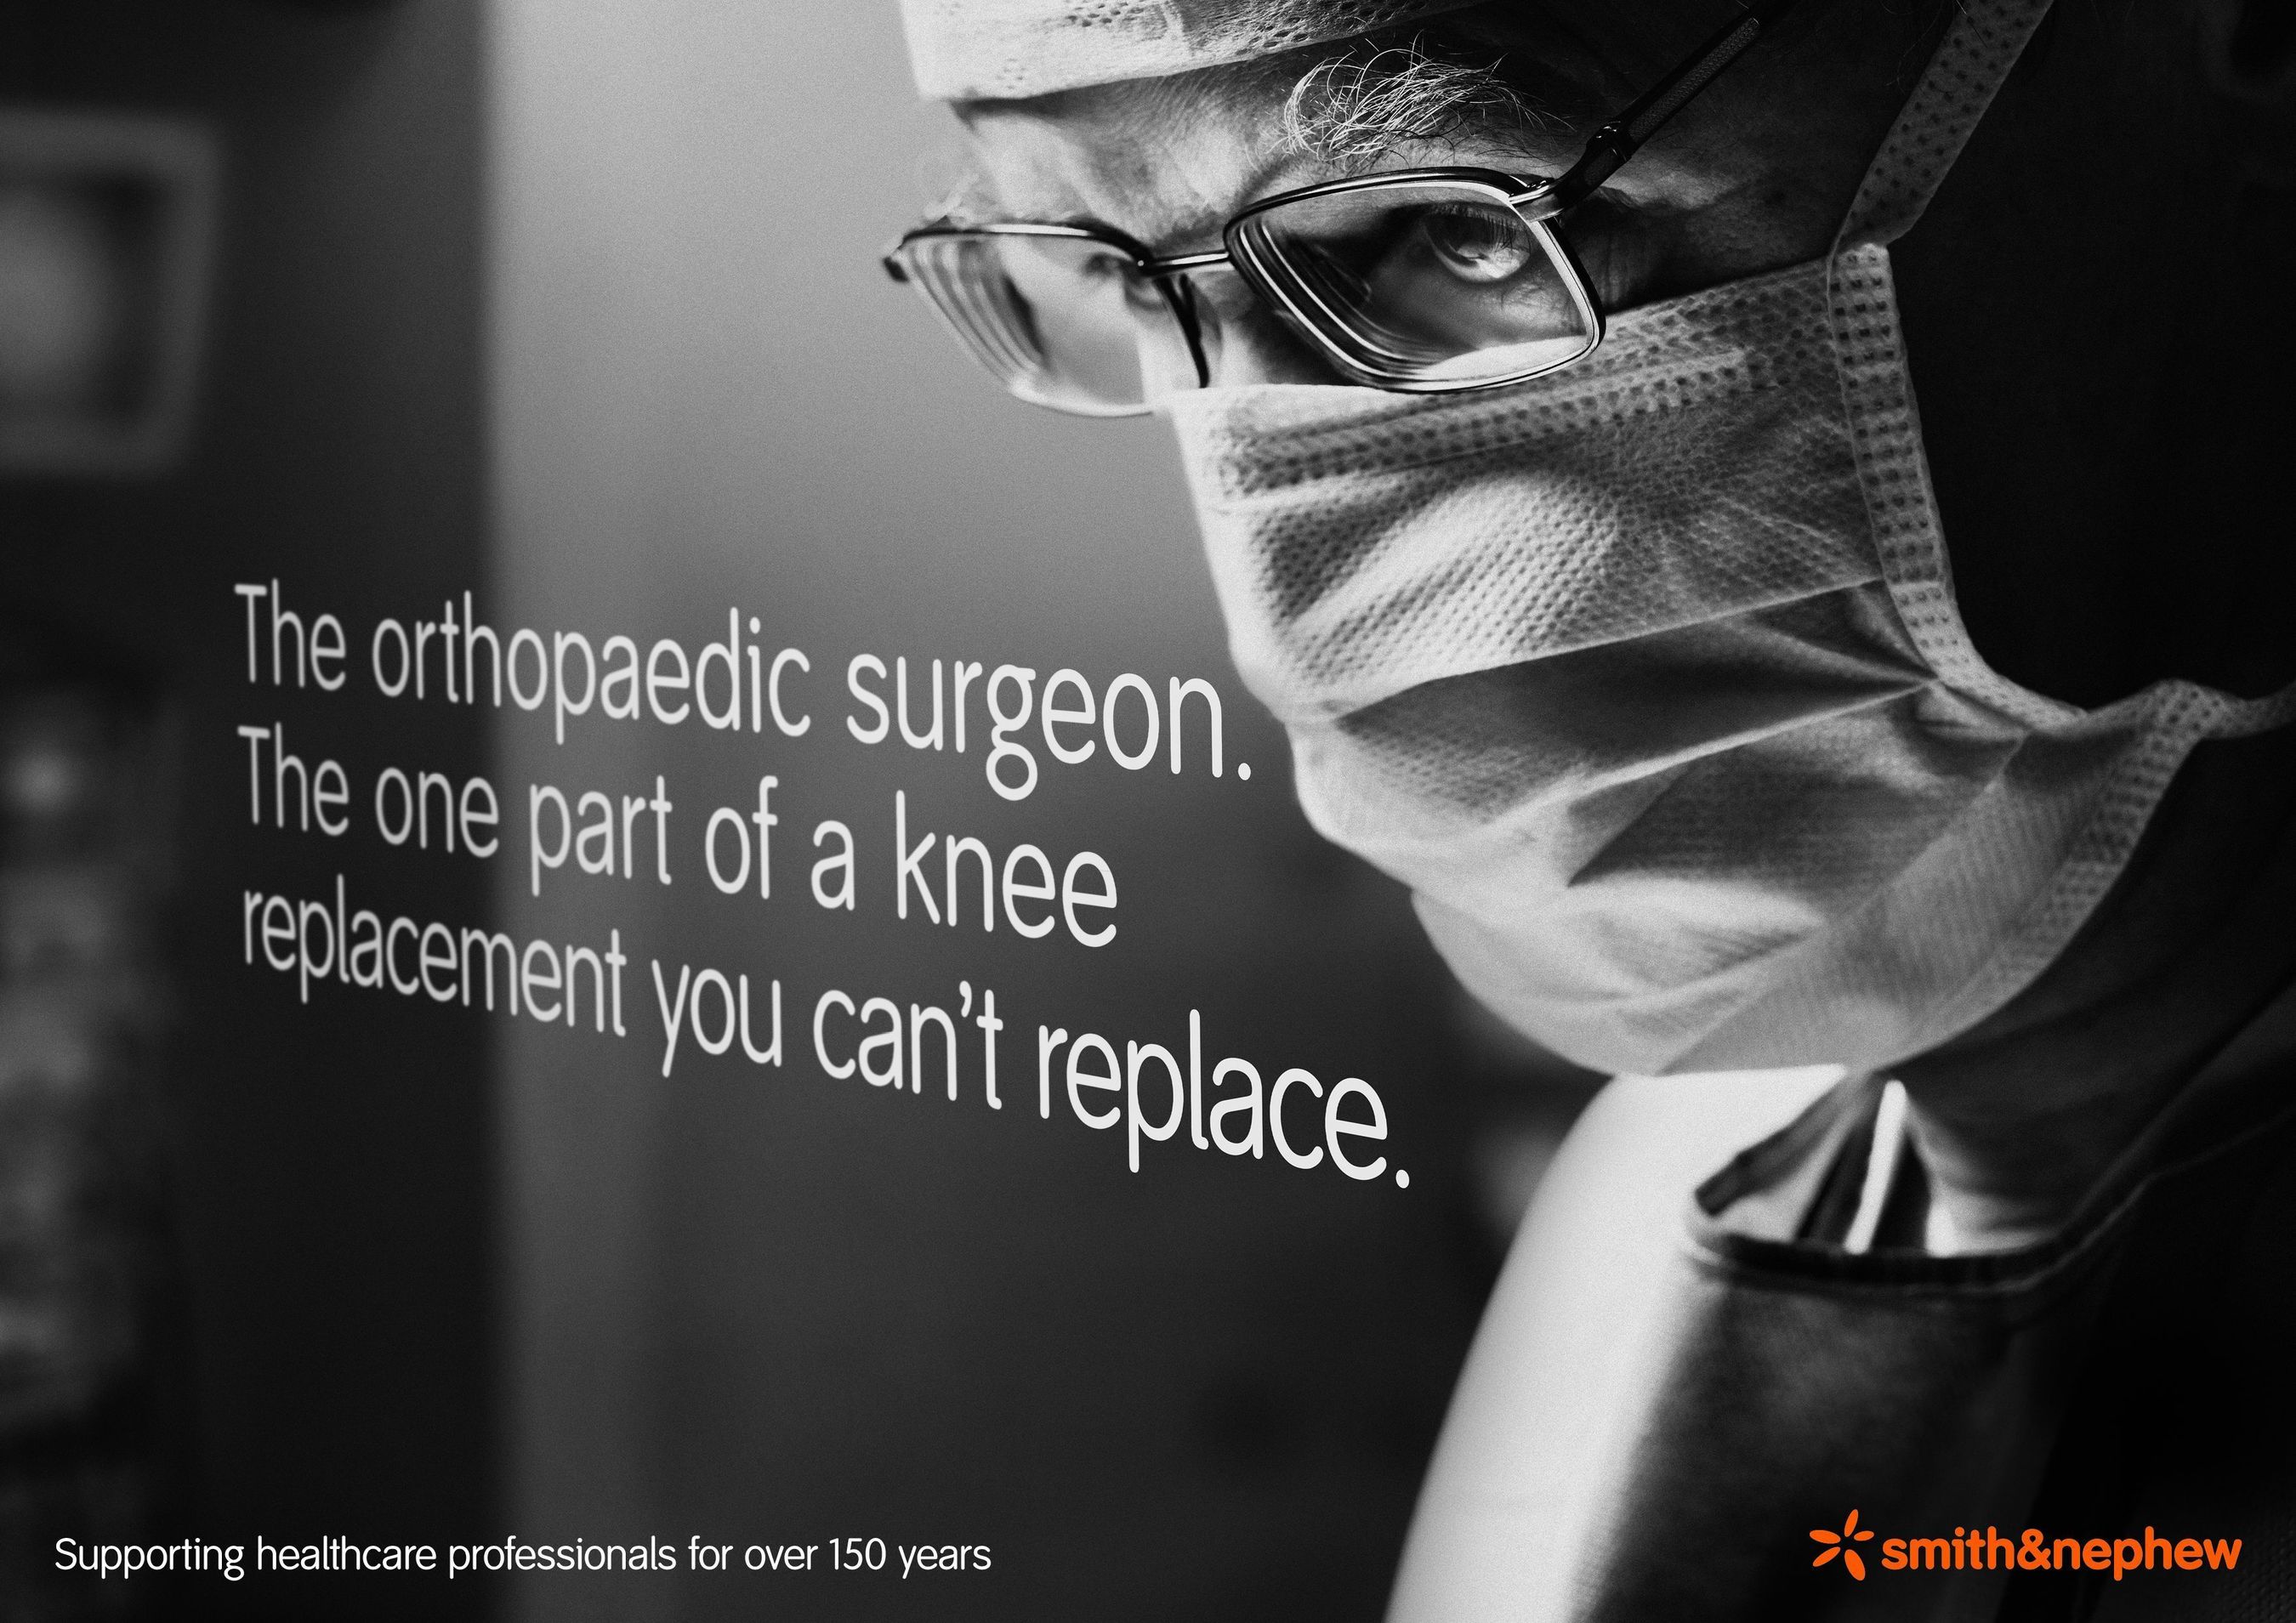 Championing our healthcare professionals: Smith & Nephew launches awareness campaign (PRNewsFoto/Smith & Nephew plc)